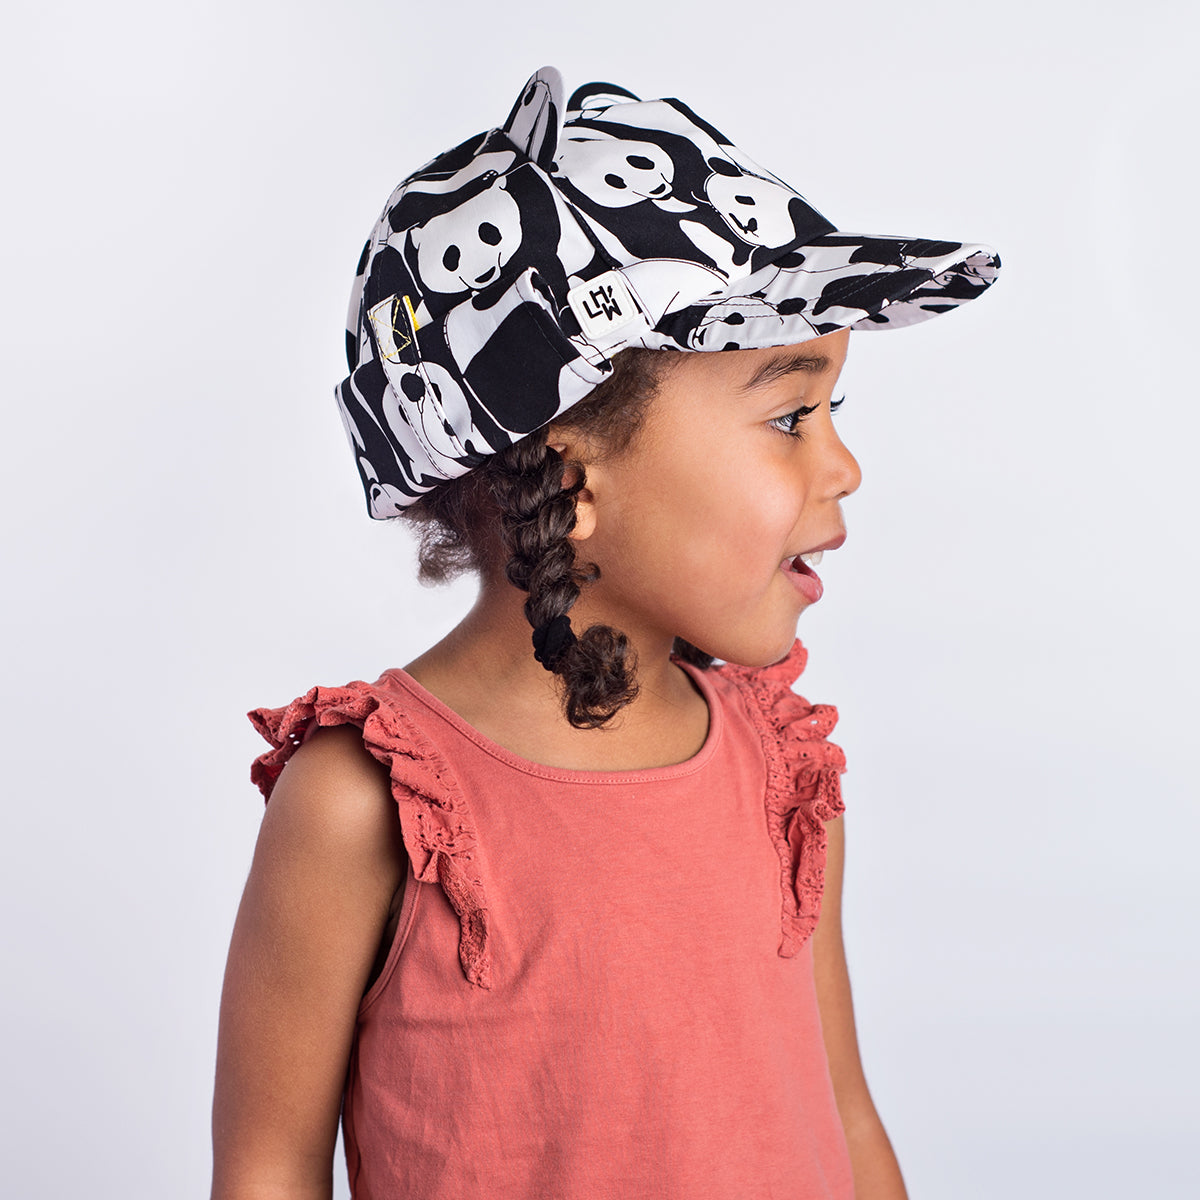 UV Protection Kids Sun Hat with Neck Flap in black and white design –  Little Hotdog Watson